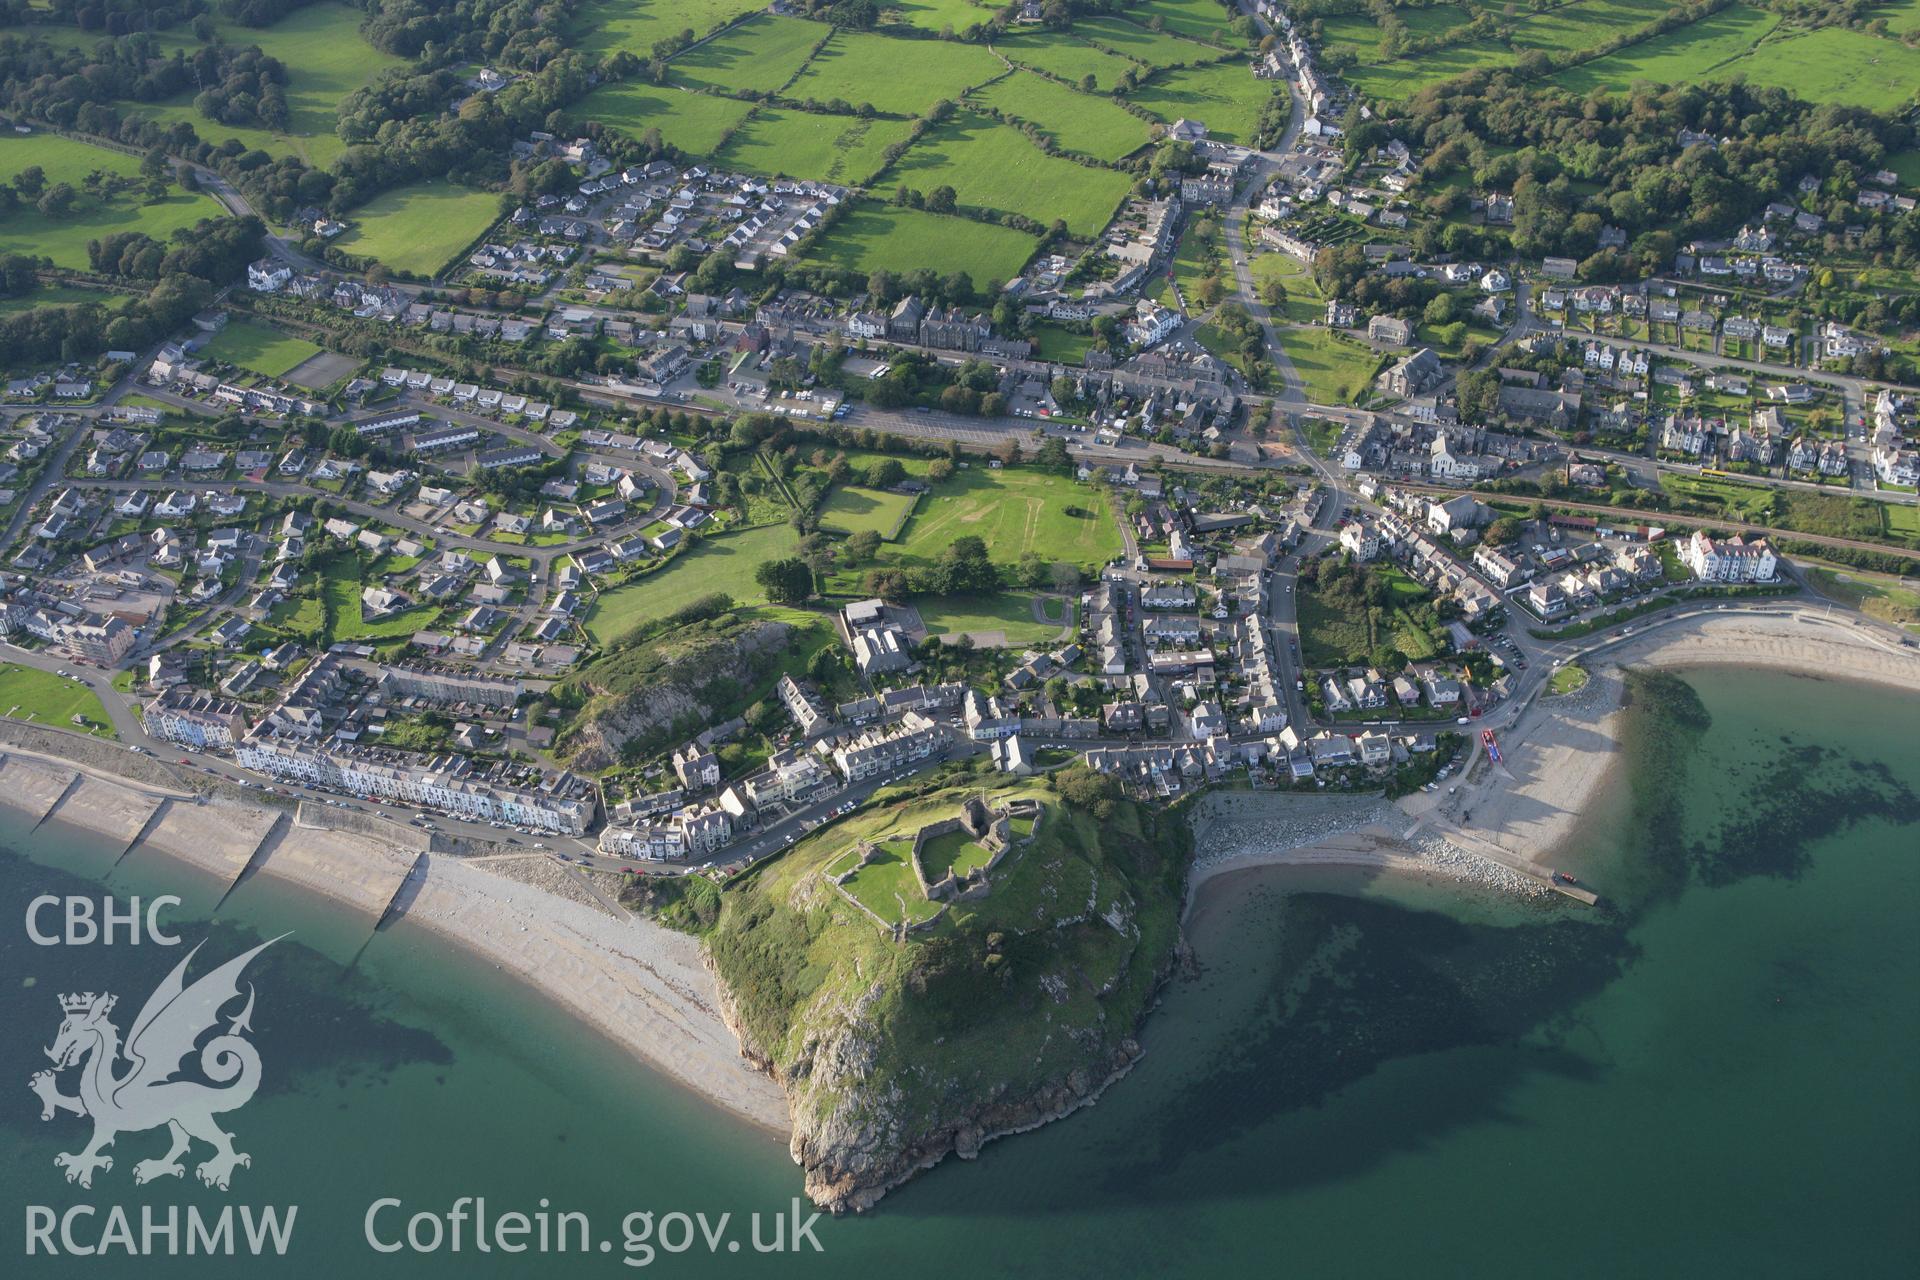 RCAHMW colour oblique aerial photograph of Criccieth Castle. Taken on 06 September 2007 by Toby Driver